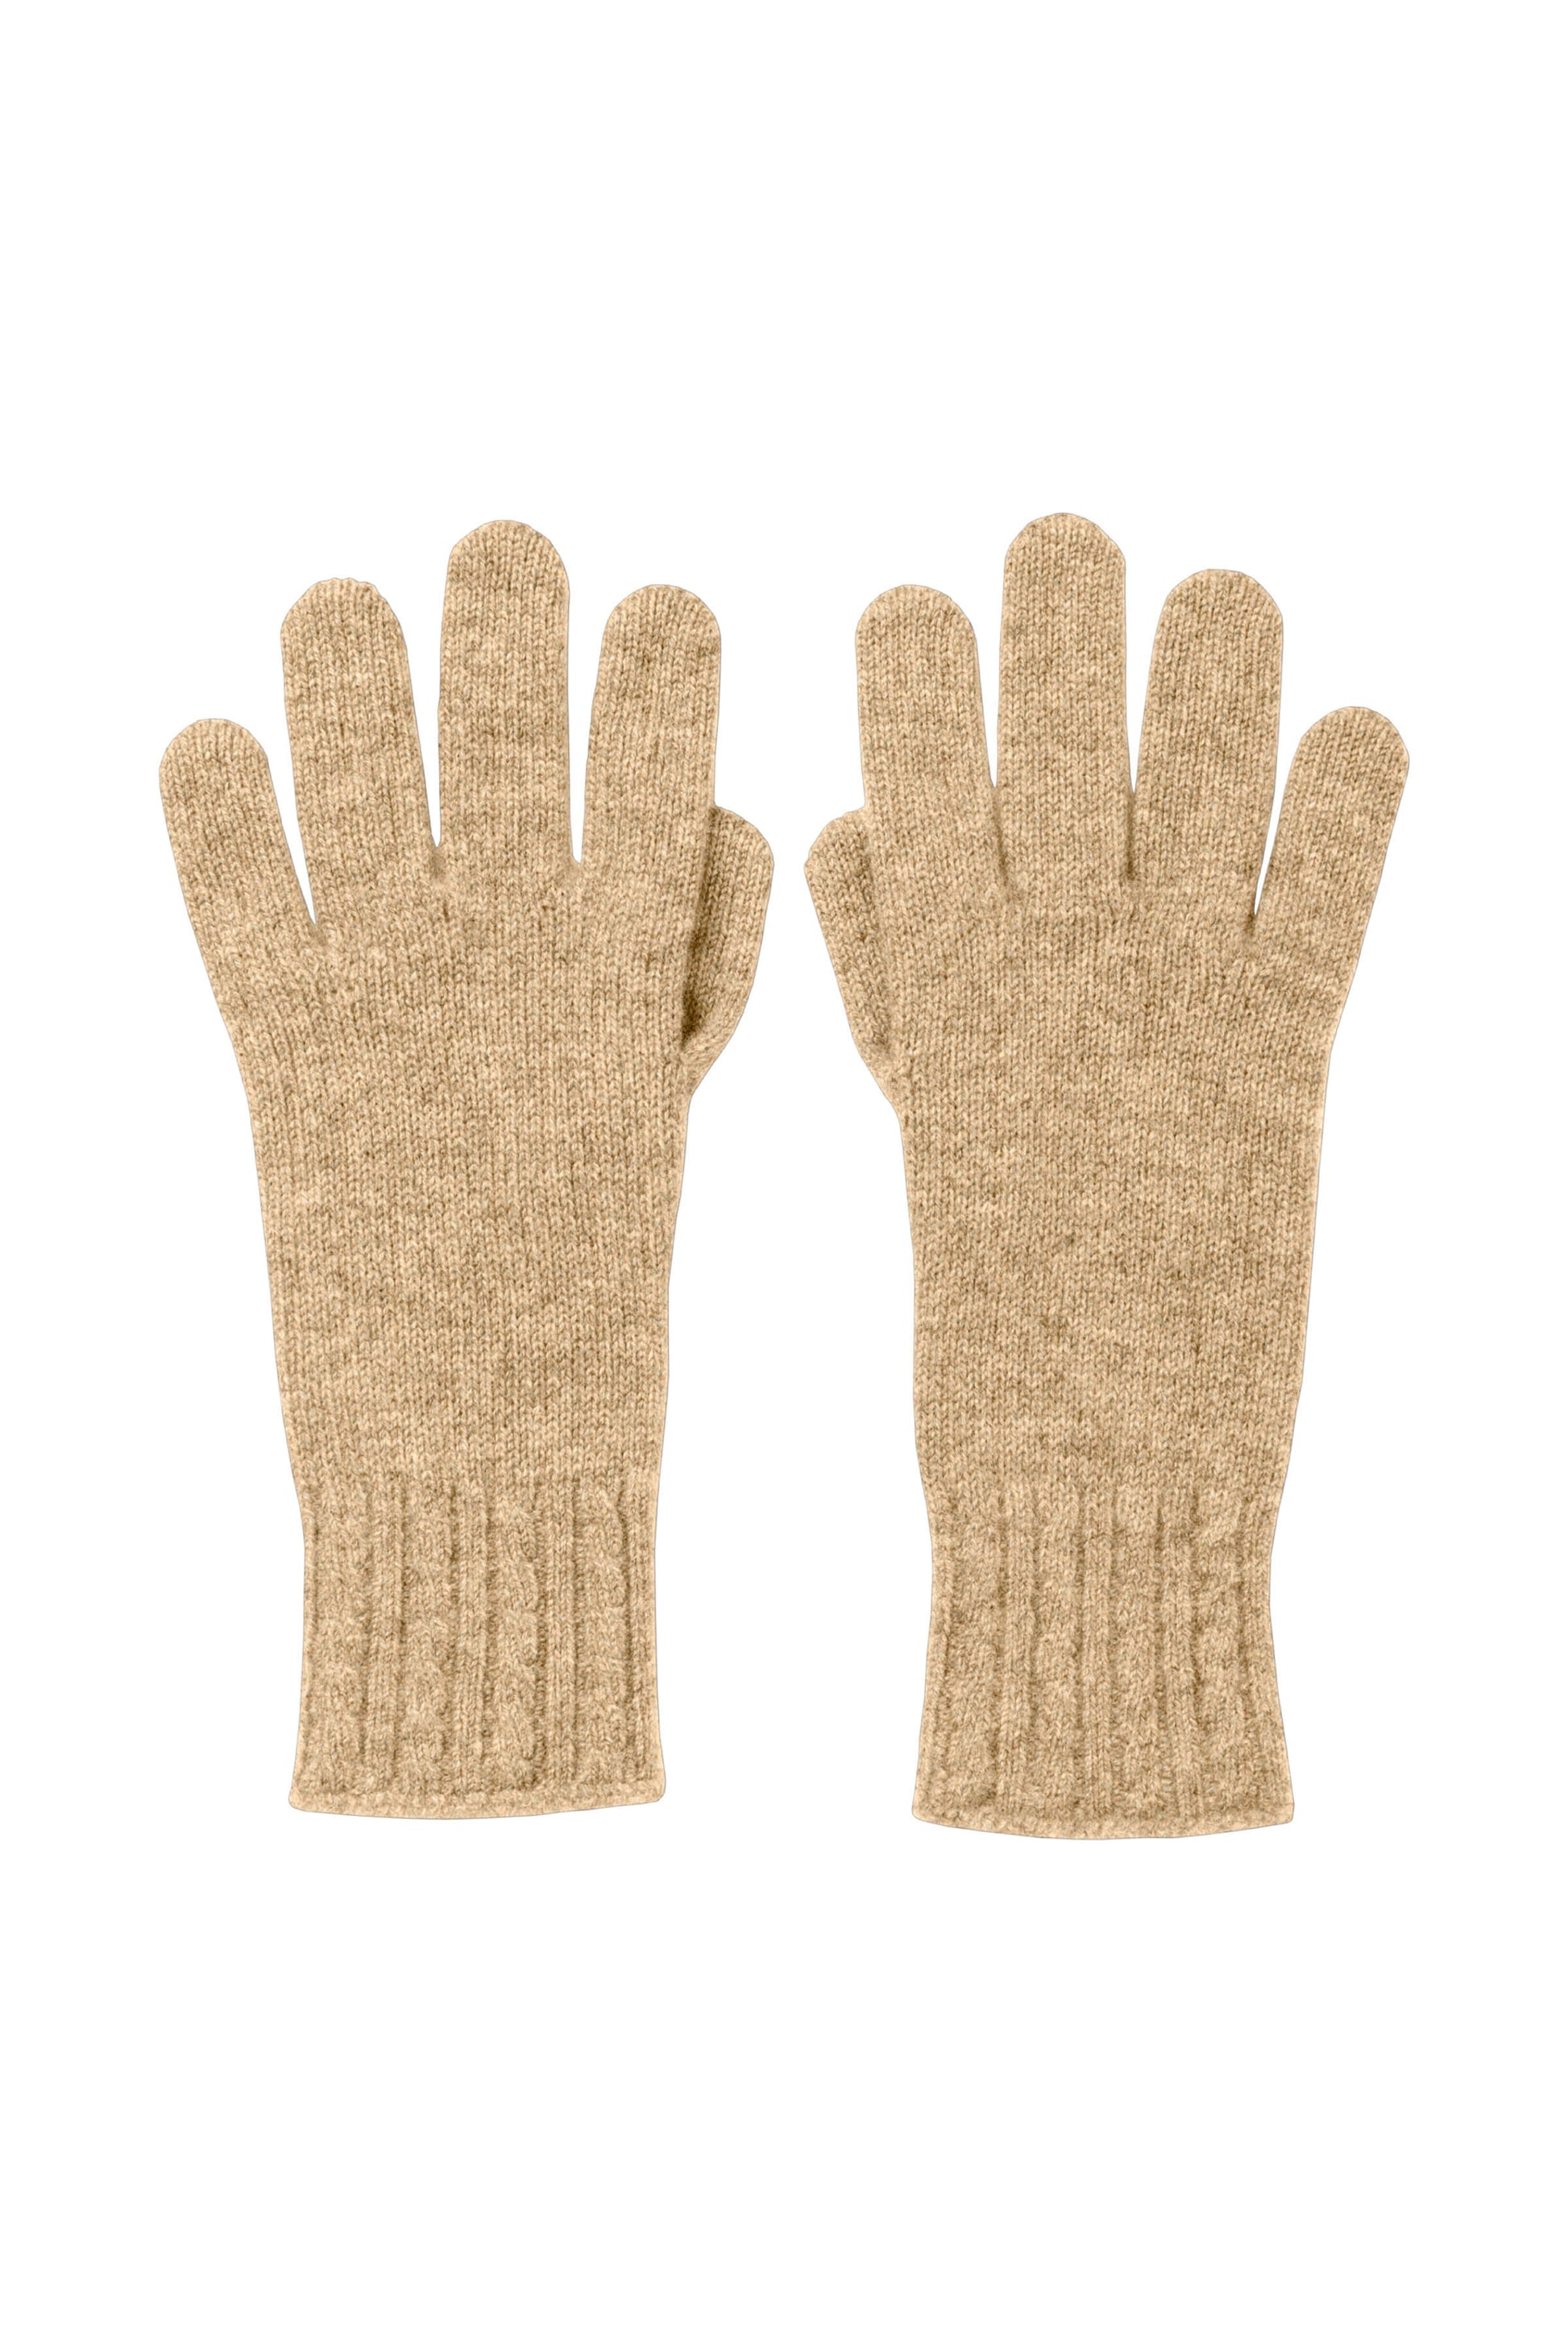 Johnstons of Elgin’s Oatmeal Women's Cashmere Gloves with Cable Cuff on a white background HAE03245HB0210